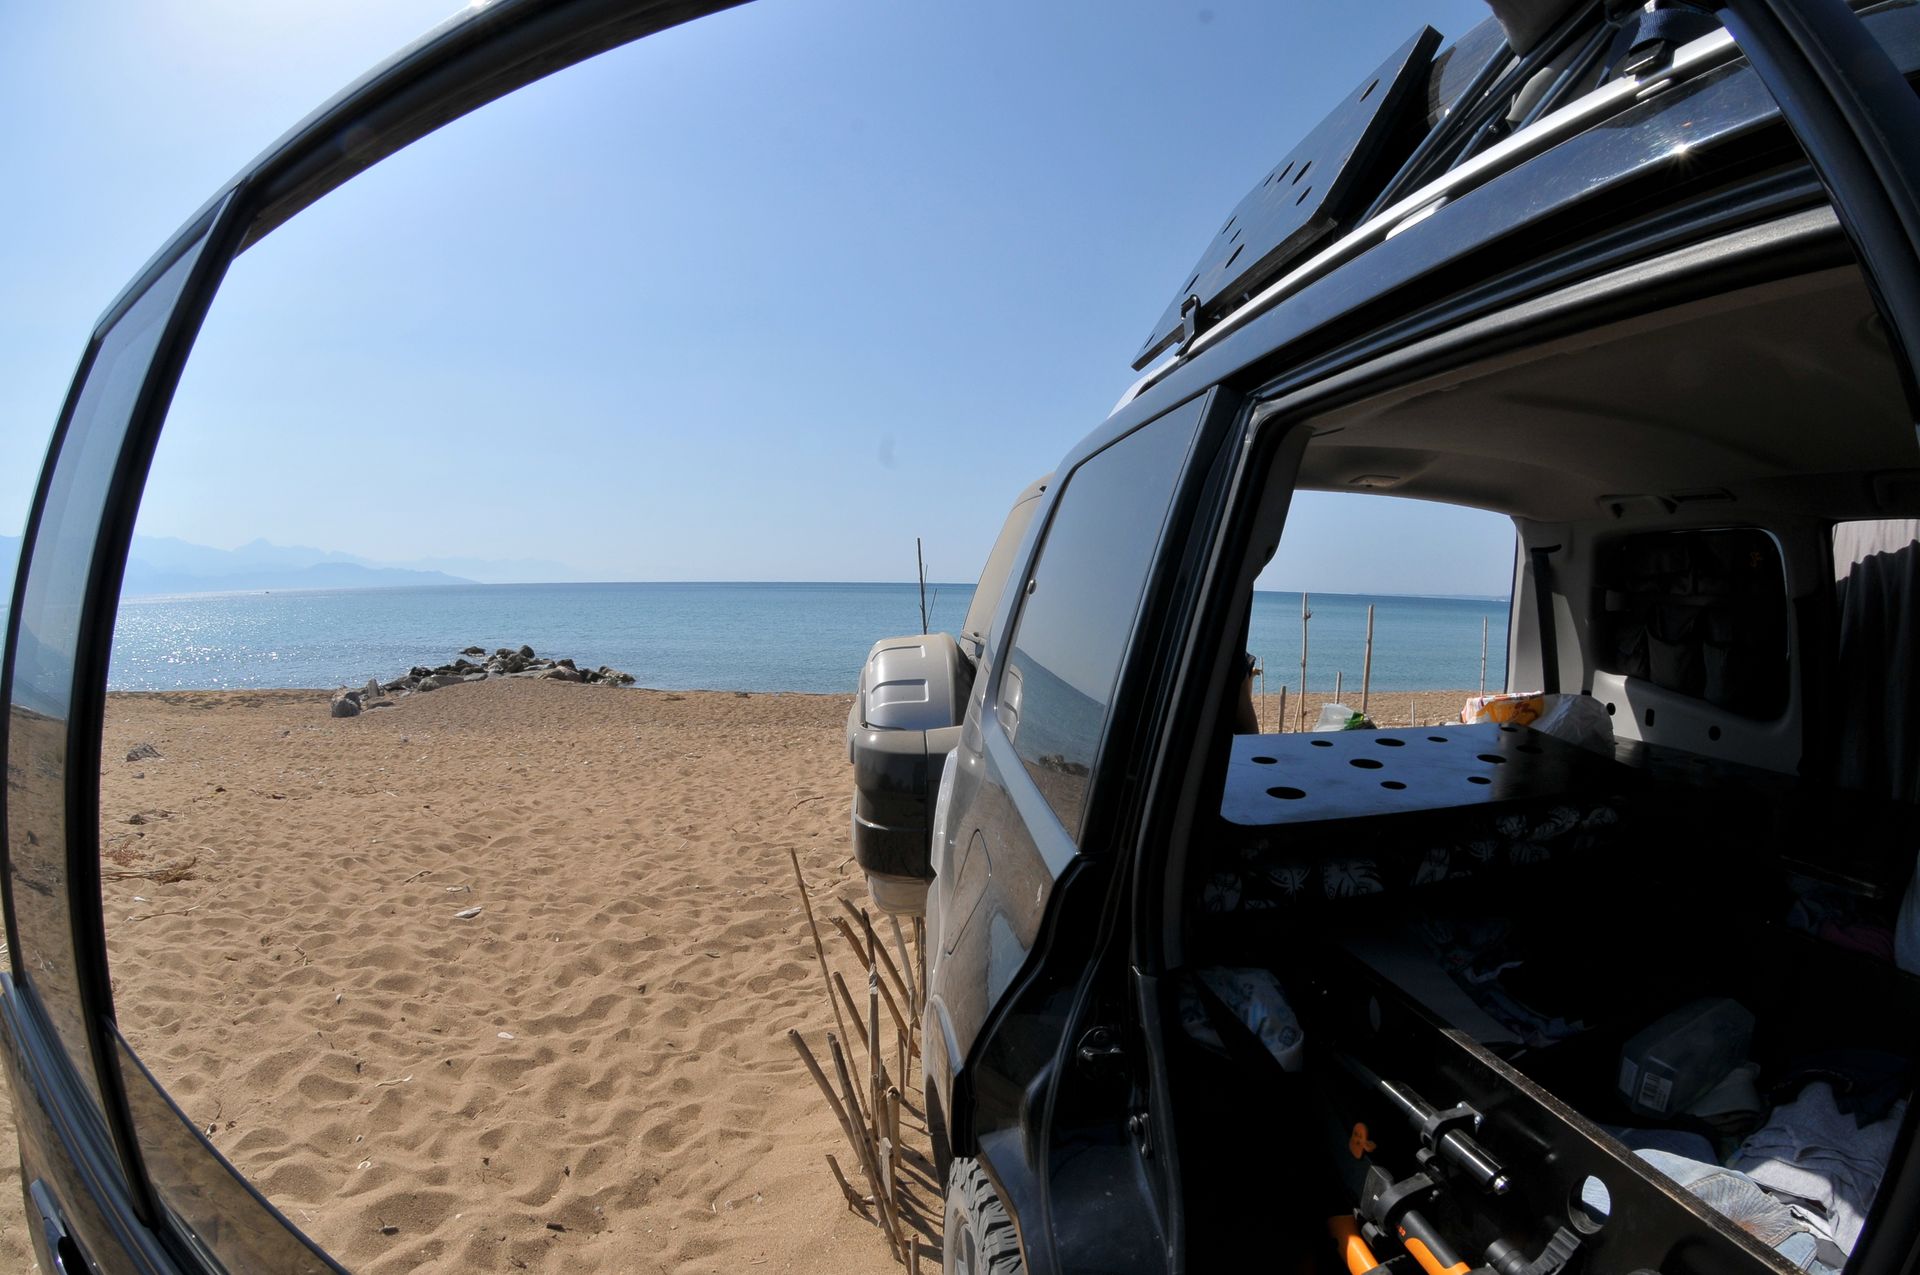 Project # PajeroCamper4x3 - travel reports - Wild Beach in the Peloponnese